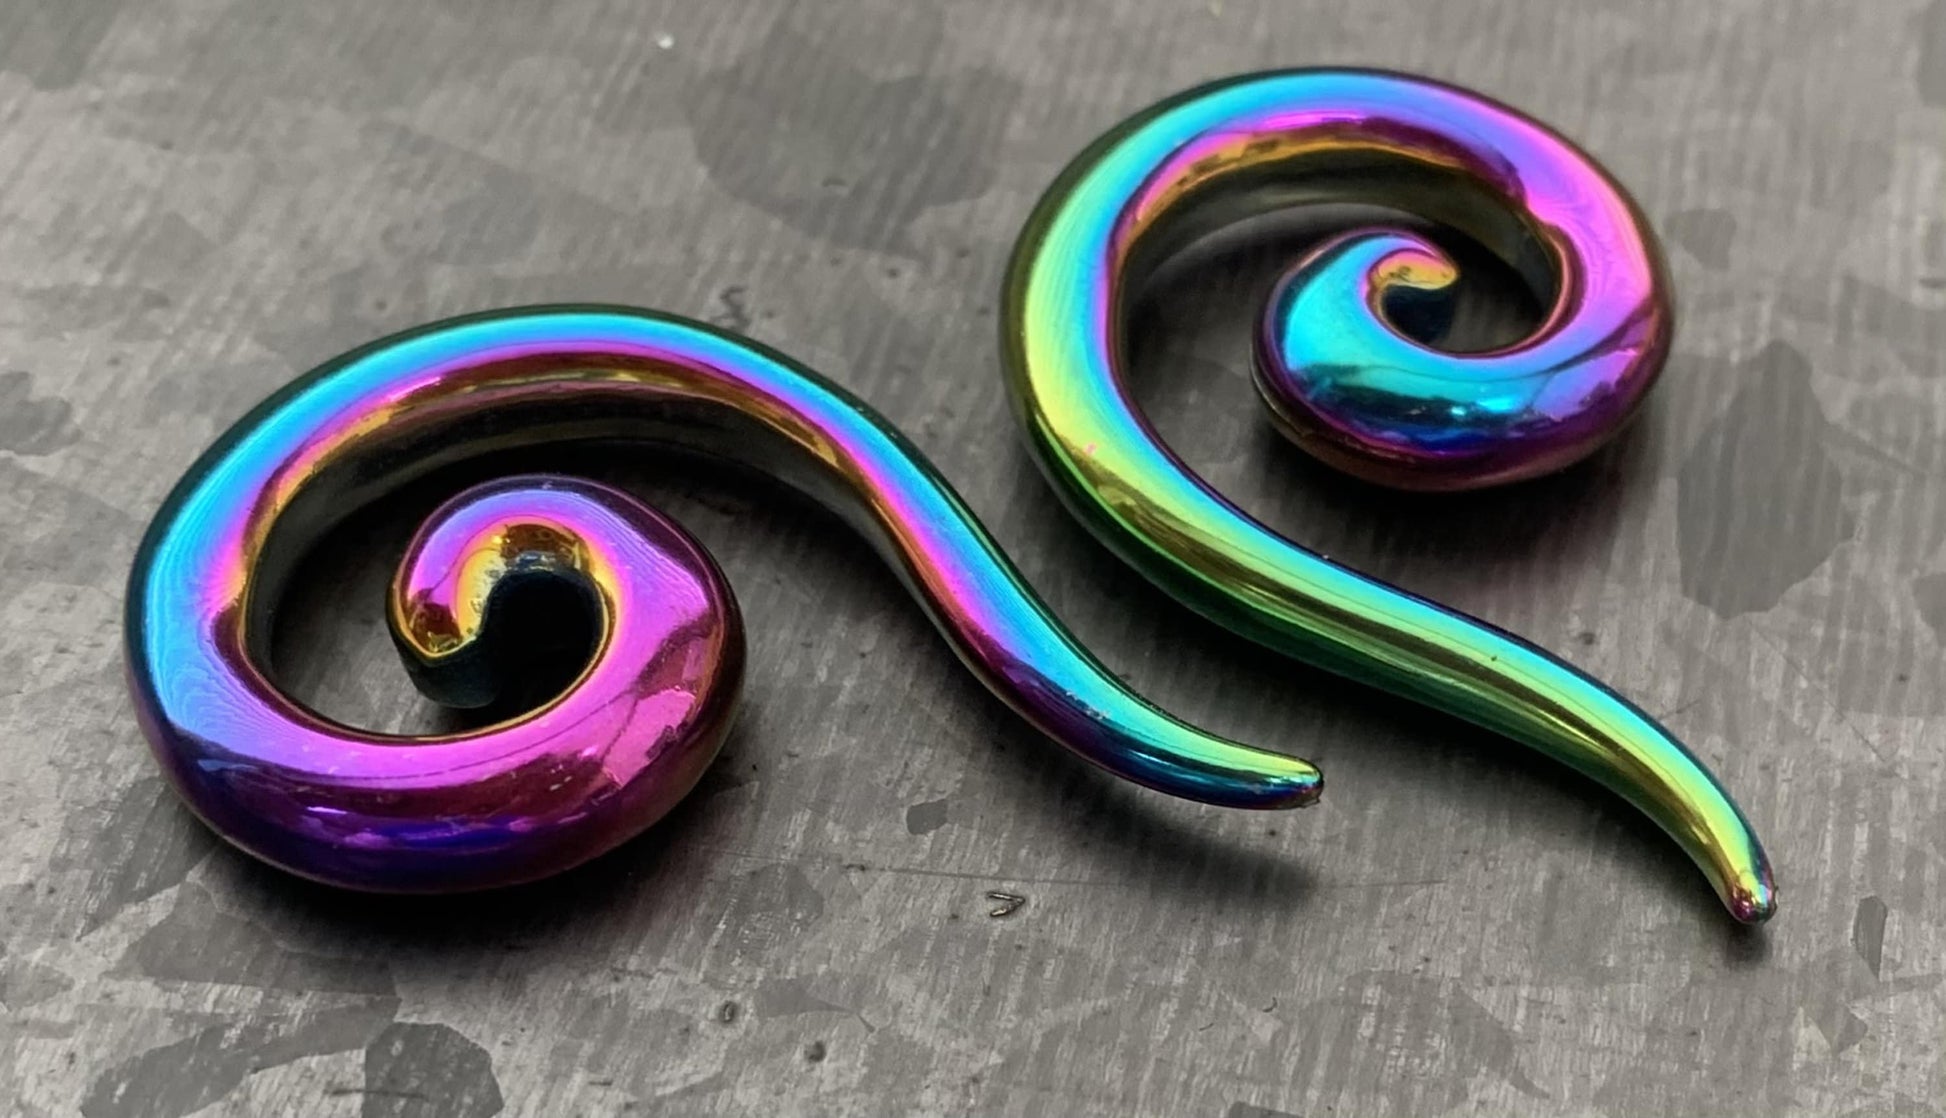 PAIR of Beautiful Surgical Steel Spiral Hanging Tapers Expanders - Black, Gold and Rainbow- Gauges 12g (2mm) thru 2g (6mm) available!